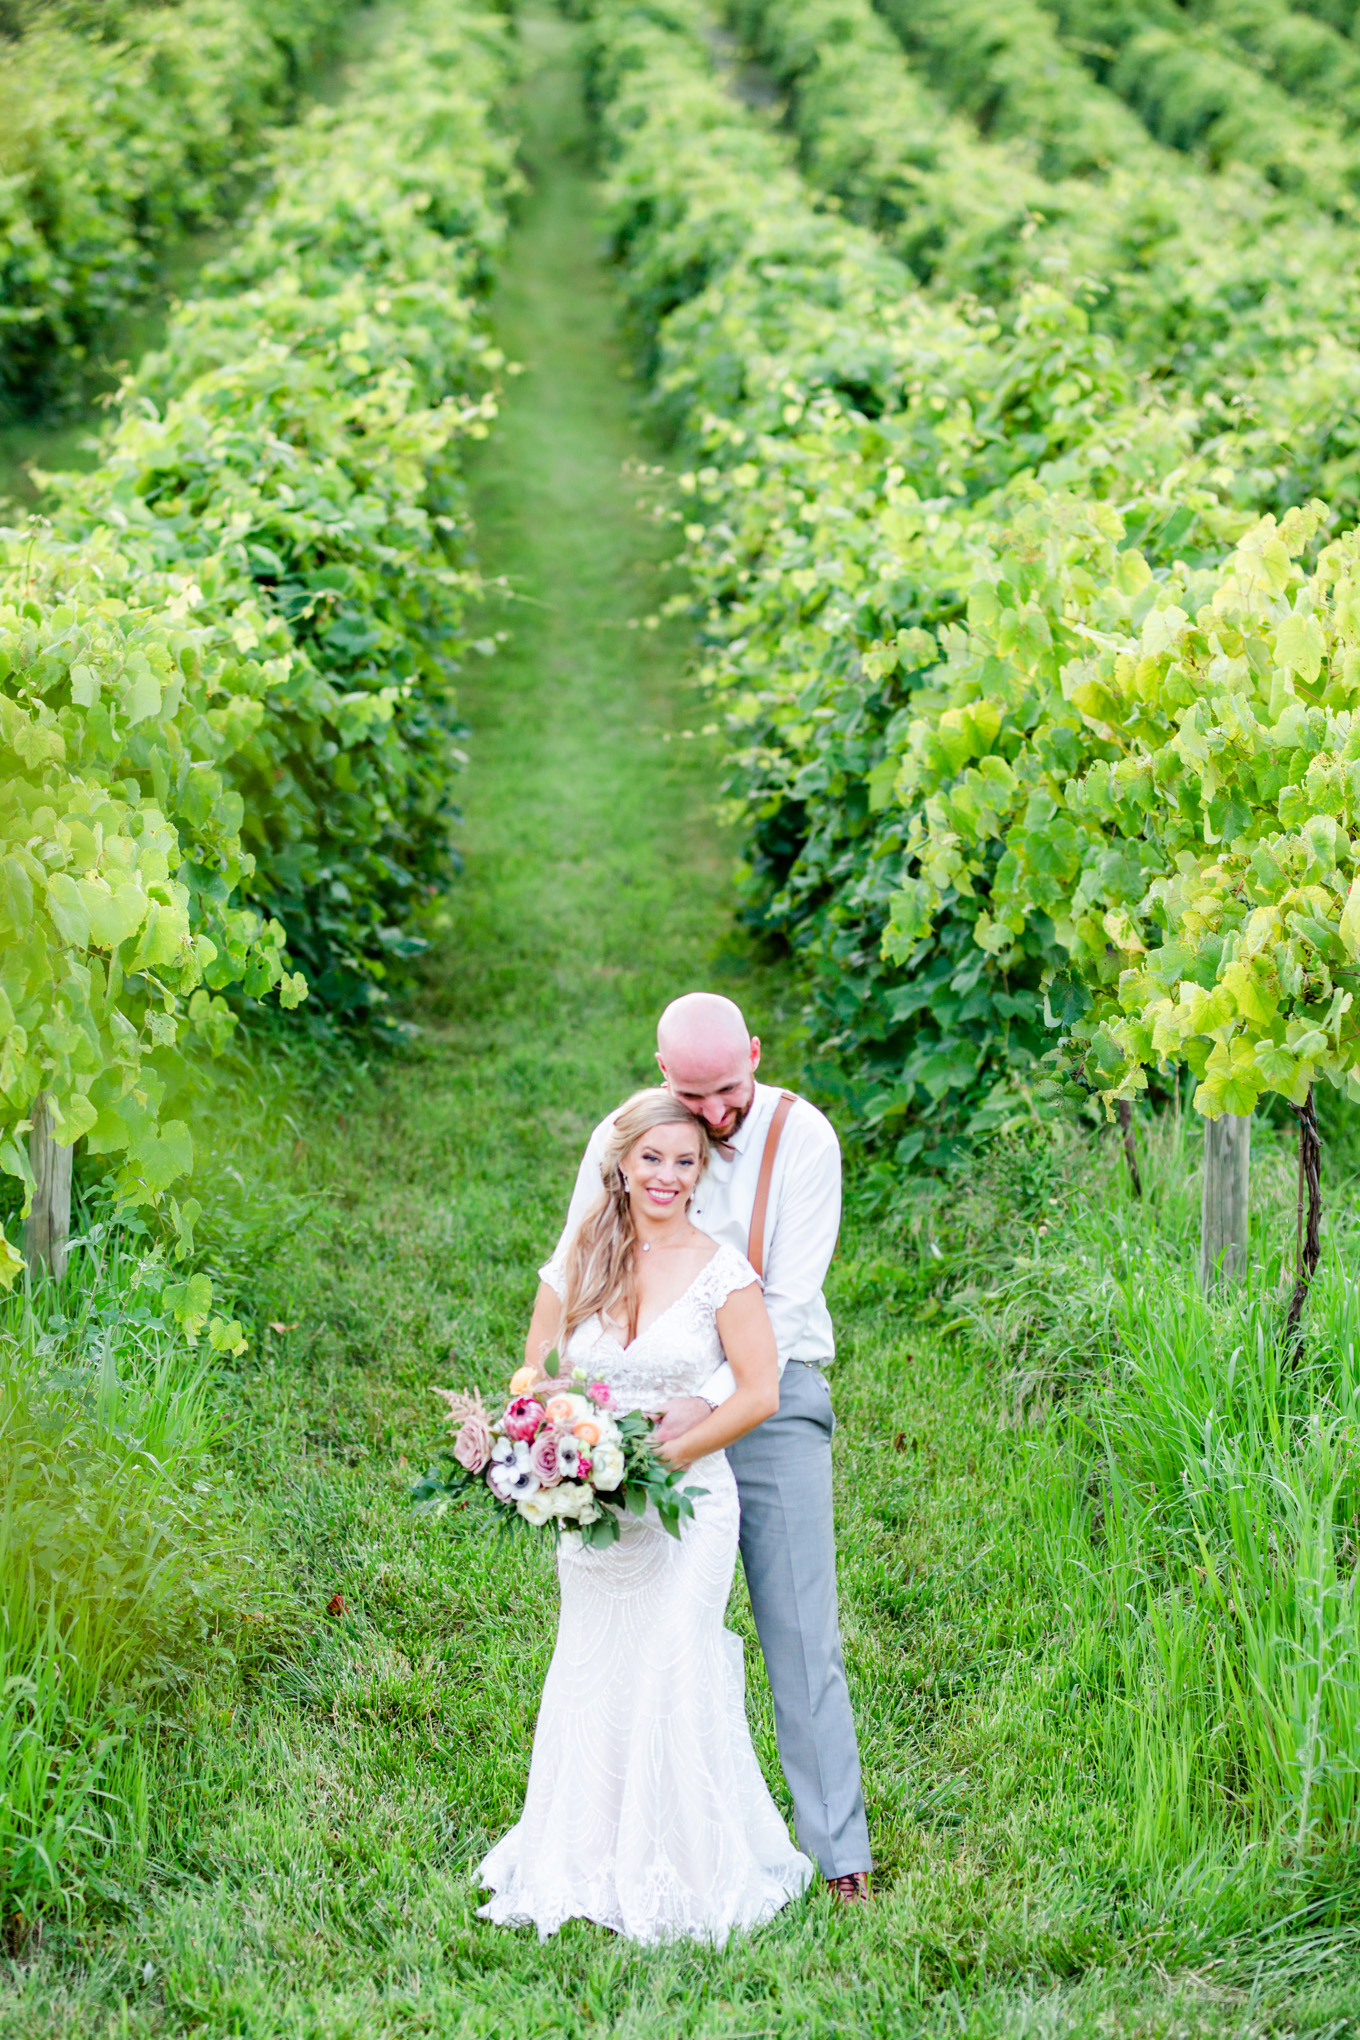 romantic Bluemont Vineyard wedding, Bluemont Vineyard, romantic wedding colors, Loudoun County wedding, Loudoun County wedding photographer, Loudoun County wedding venues, non-denominational wedding ceremony, Rachel E.H. Photography, Virginia wedding, rural wedding, rustic wedding, romantic wedding, romantic aesthetic, outdoor wedding, portraits with a view, newlywed portraits, Eddy K wedding dress, Bend in the River Farms bridal bouquet